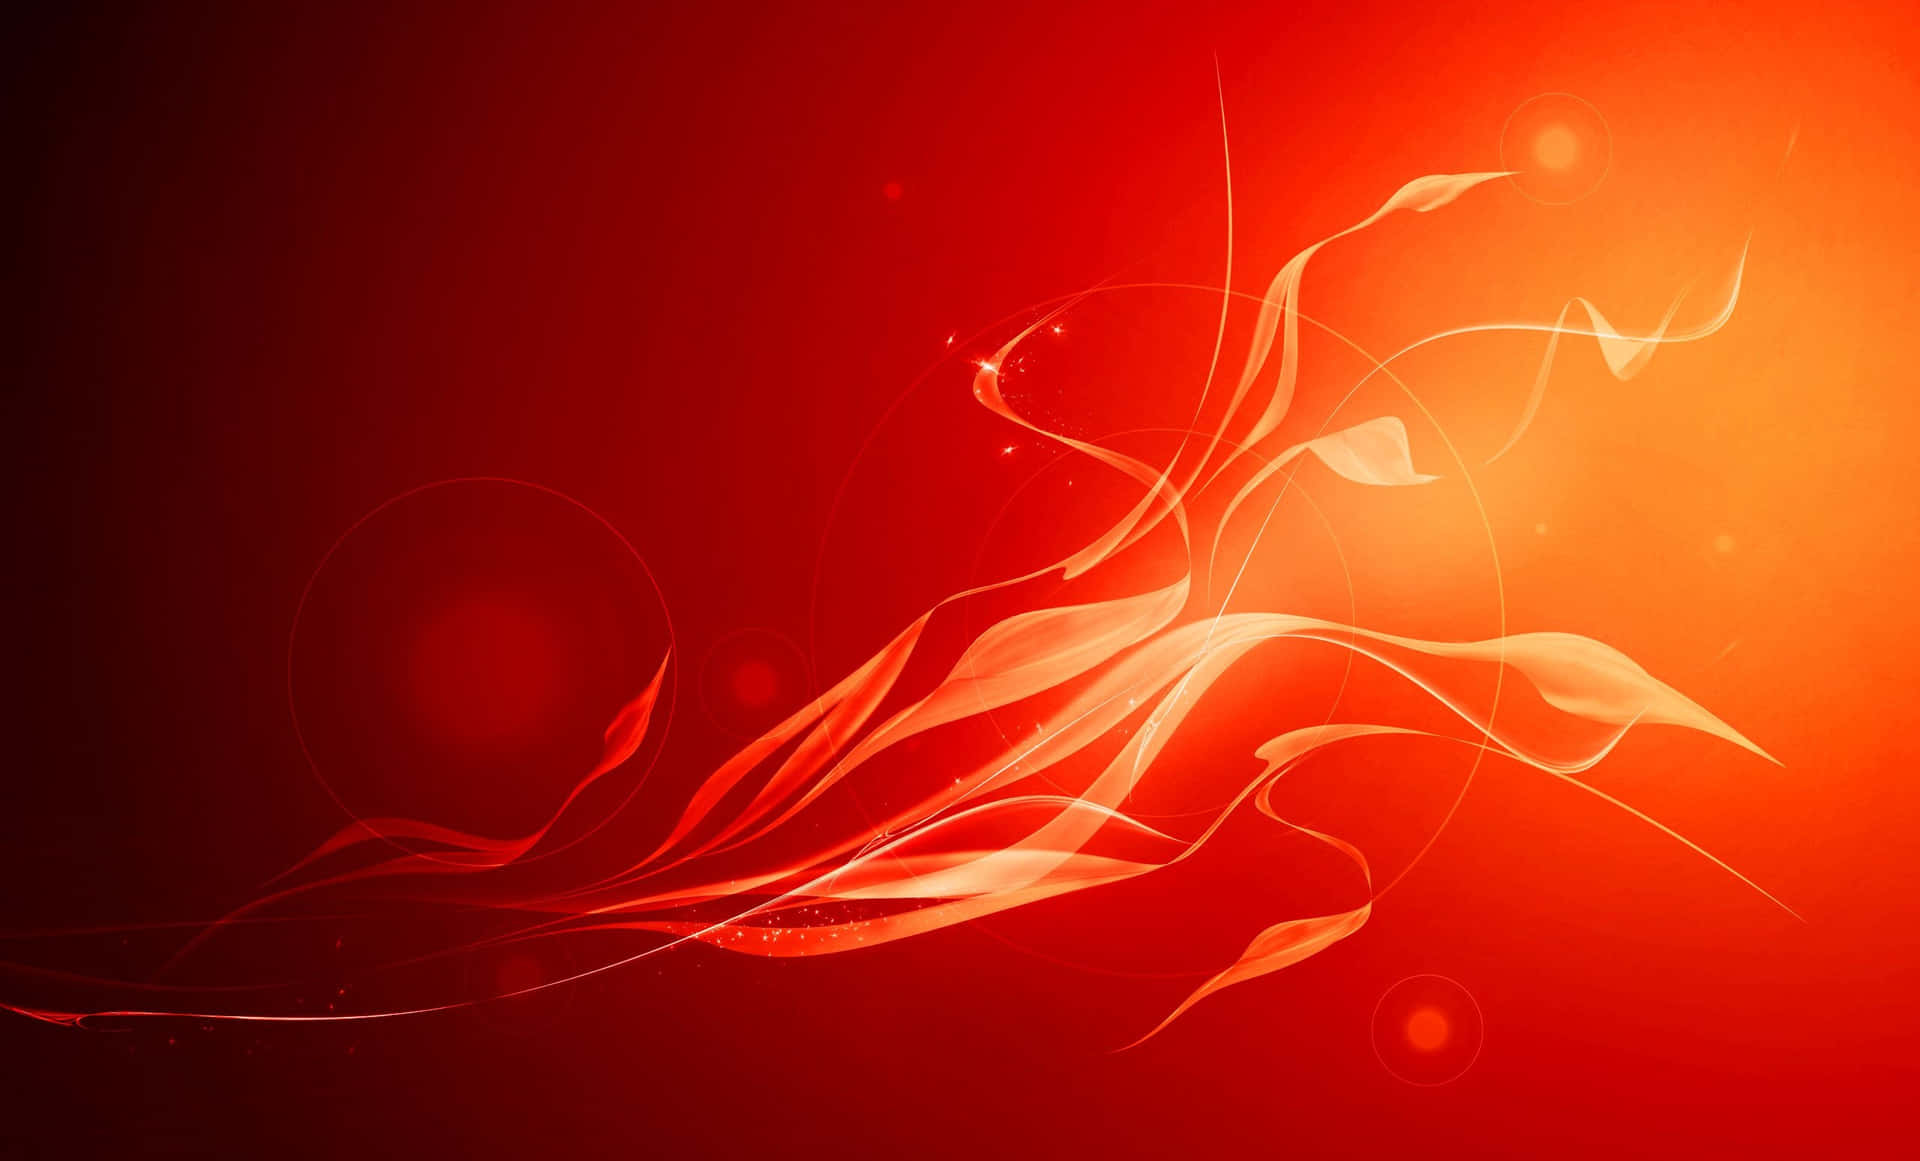 An Abstract Red Background With A Flame